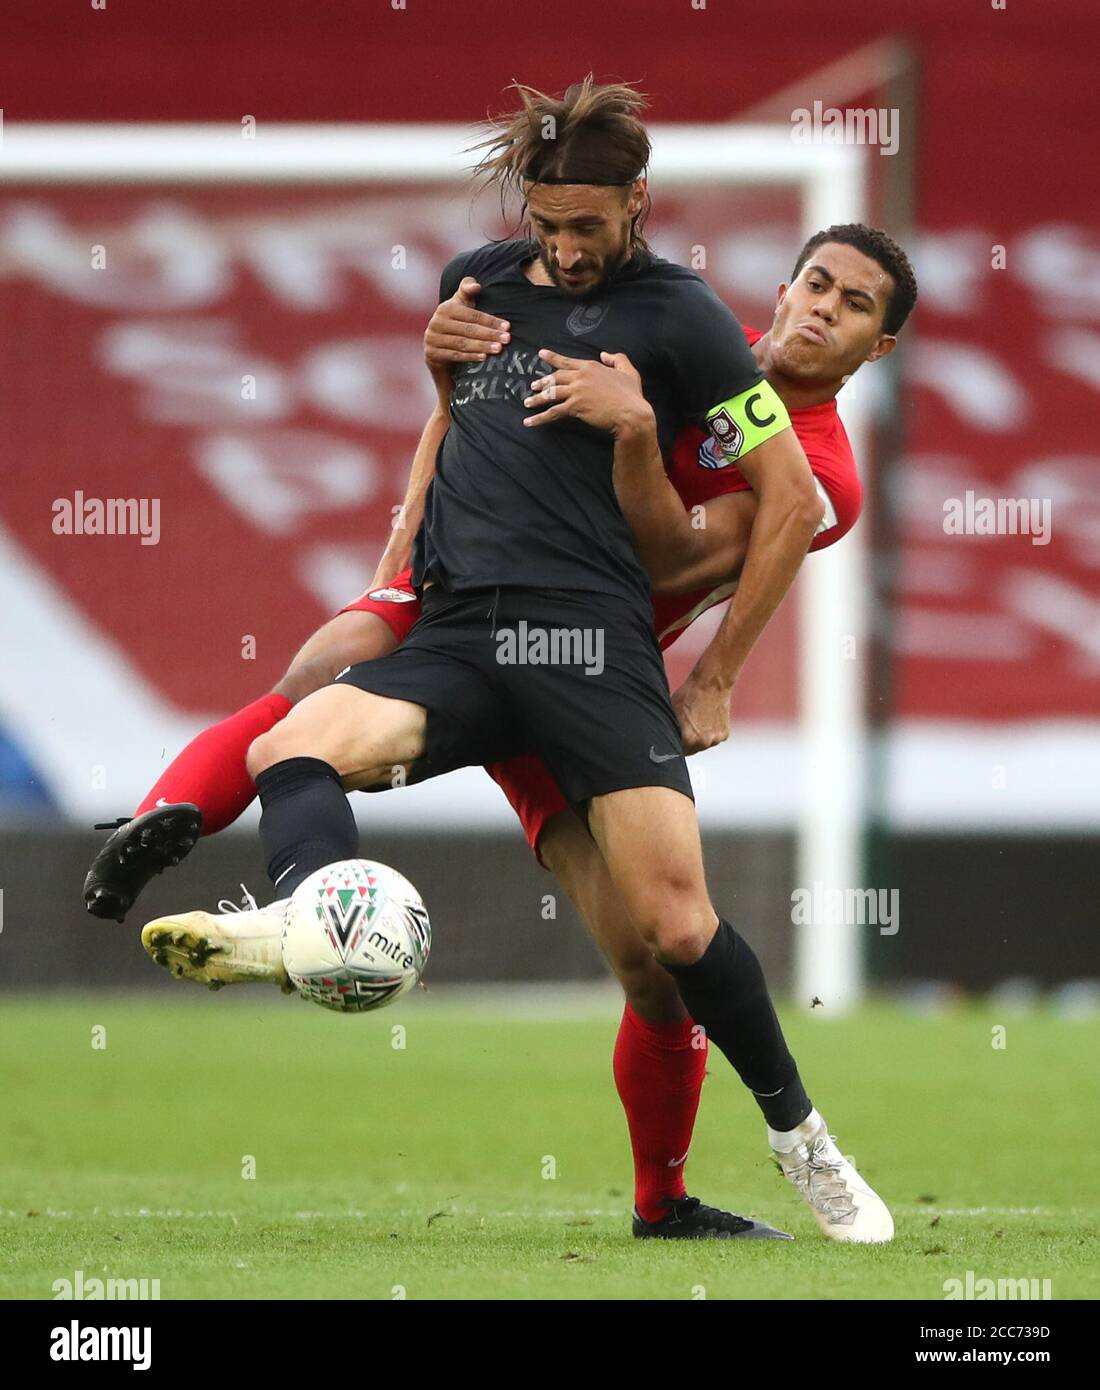 Sarajevo's Mersudin Ahmetovic (left) and Connah's Quay Nomads' Priestley Farquharson battle for the ball during the UEFA Champions League qualifying first round match at The Cardiff City Stadium, Cardiff. Stock Photo